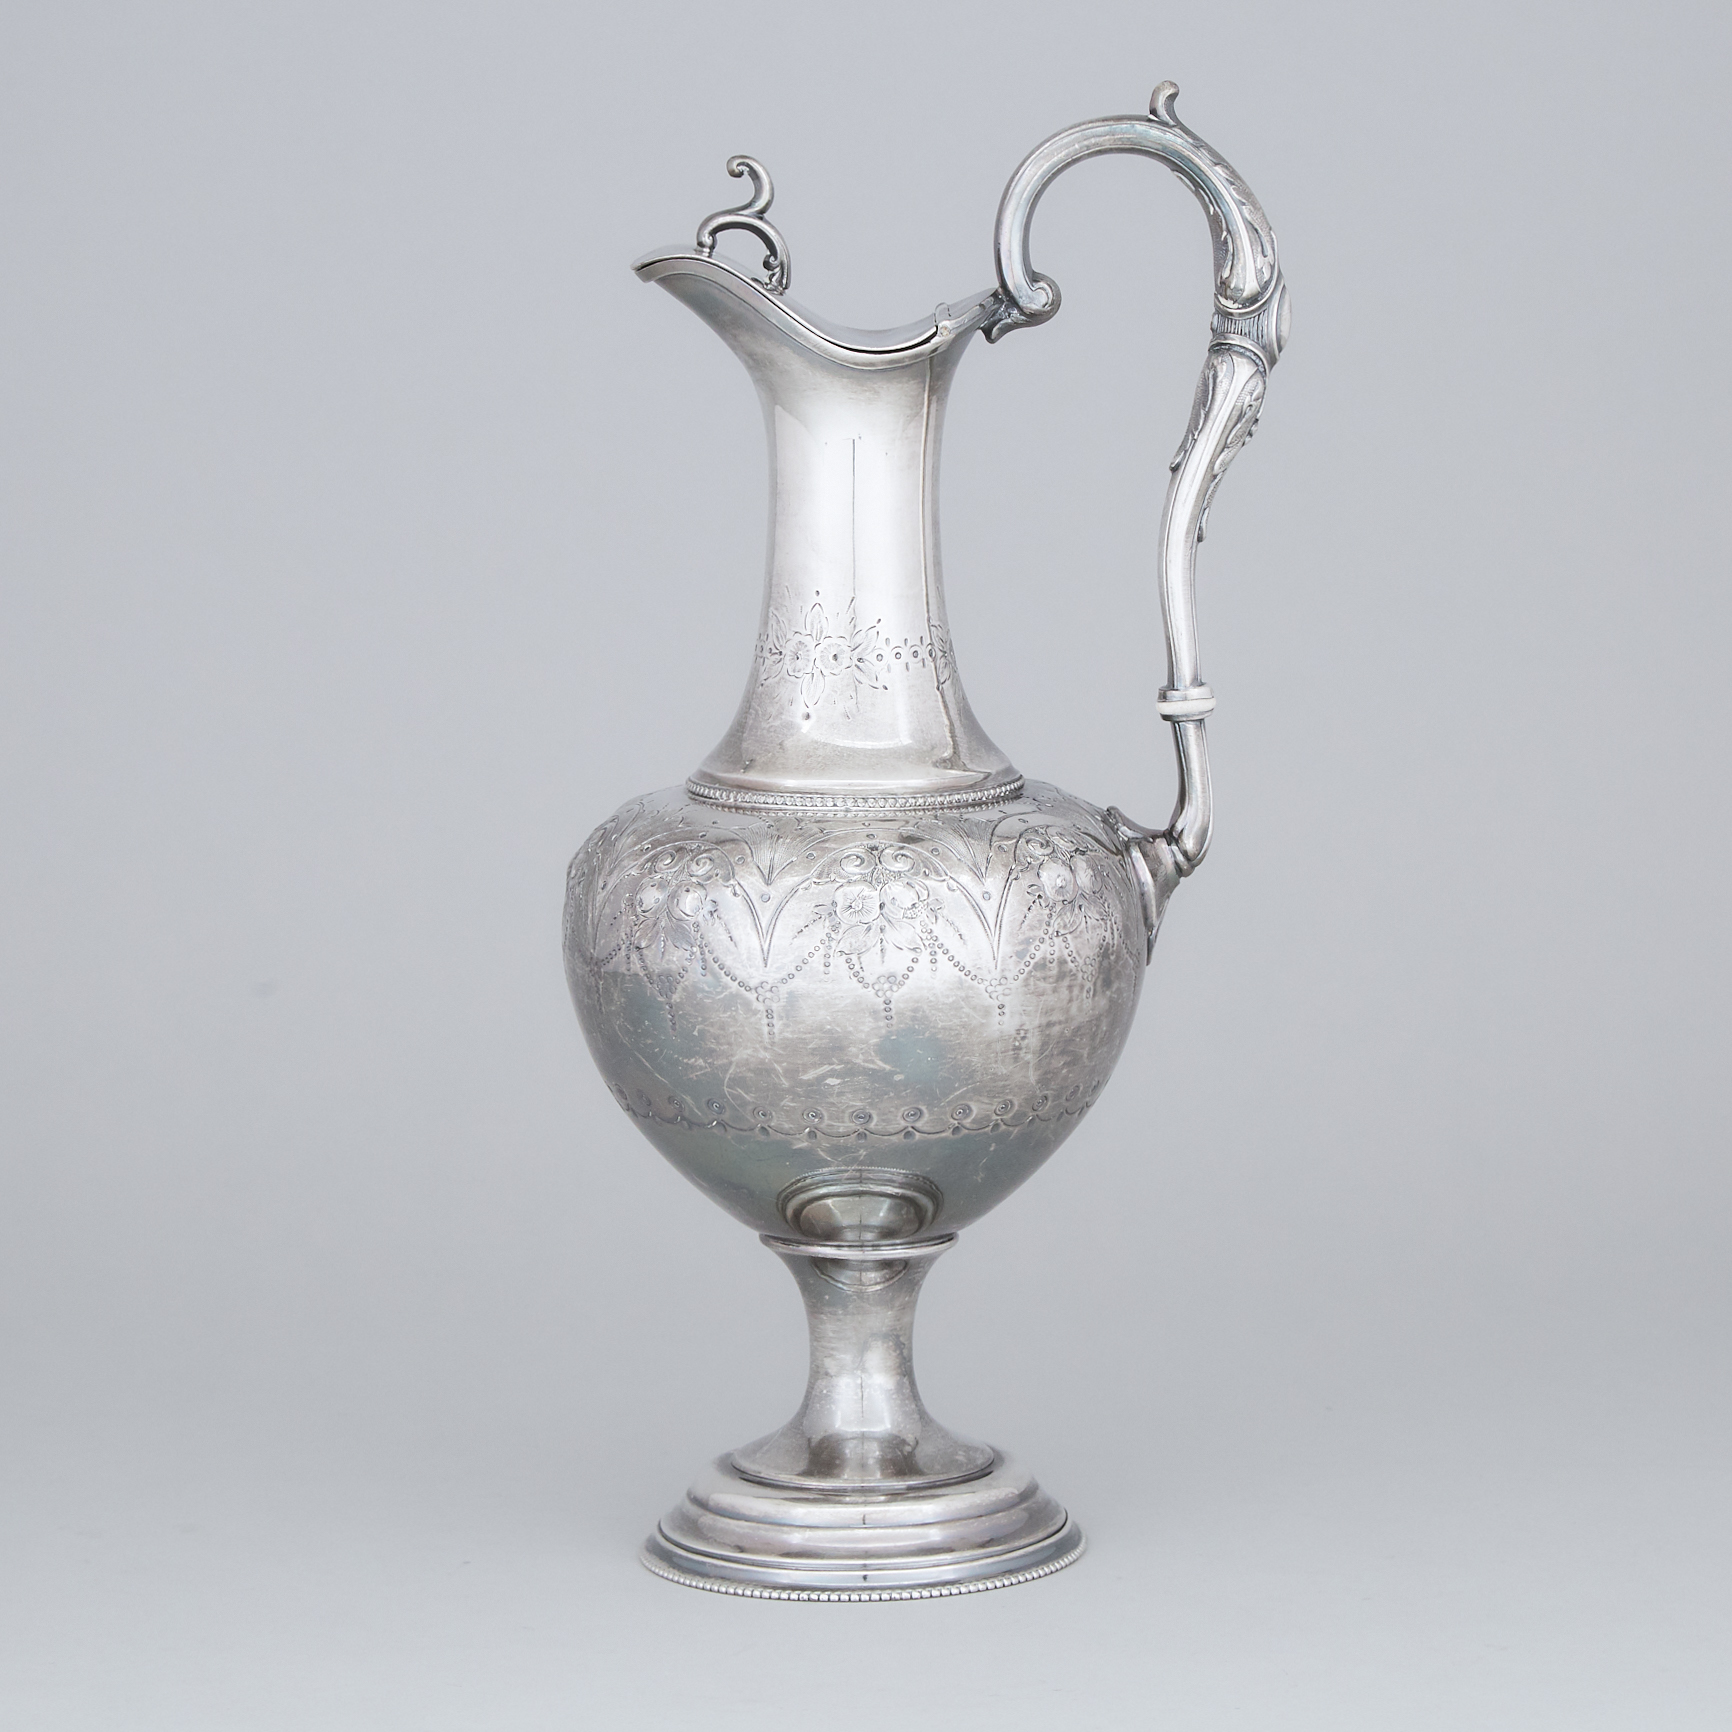 American Silver Plated Ewer, late 19th century